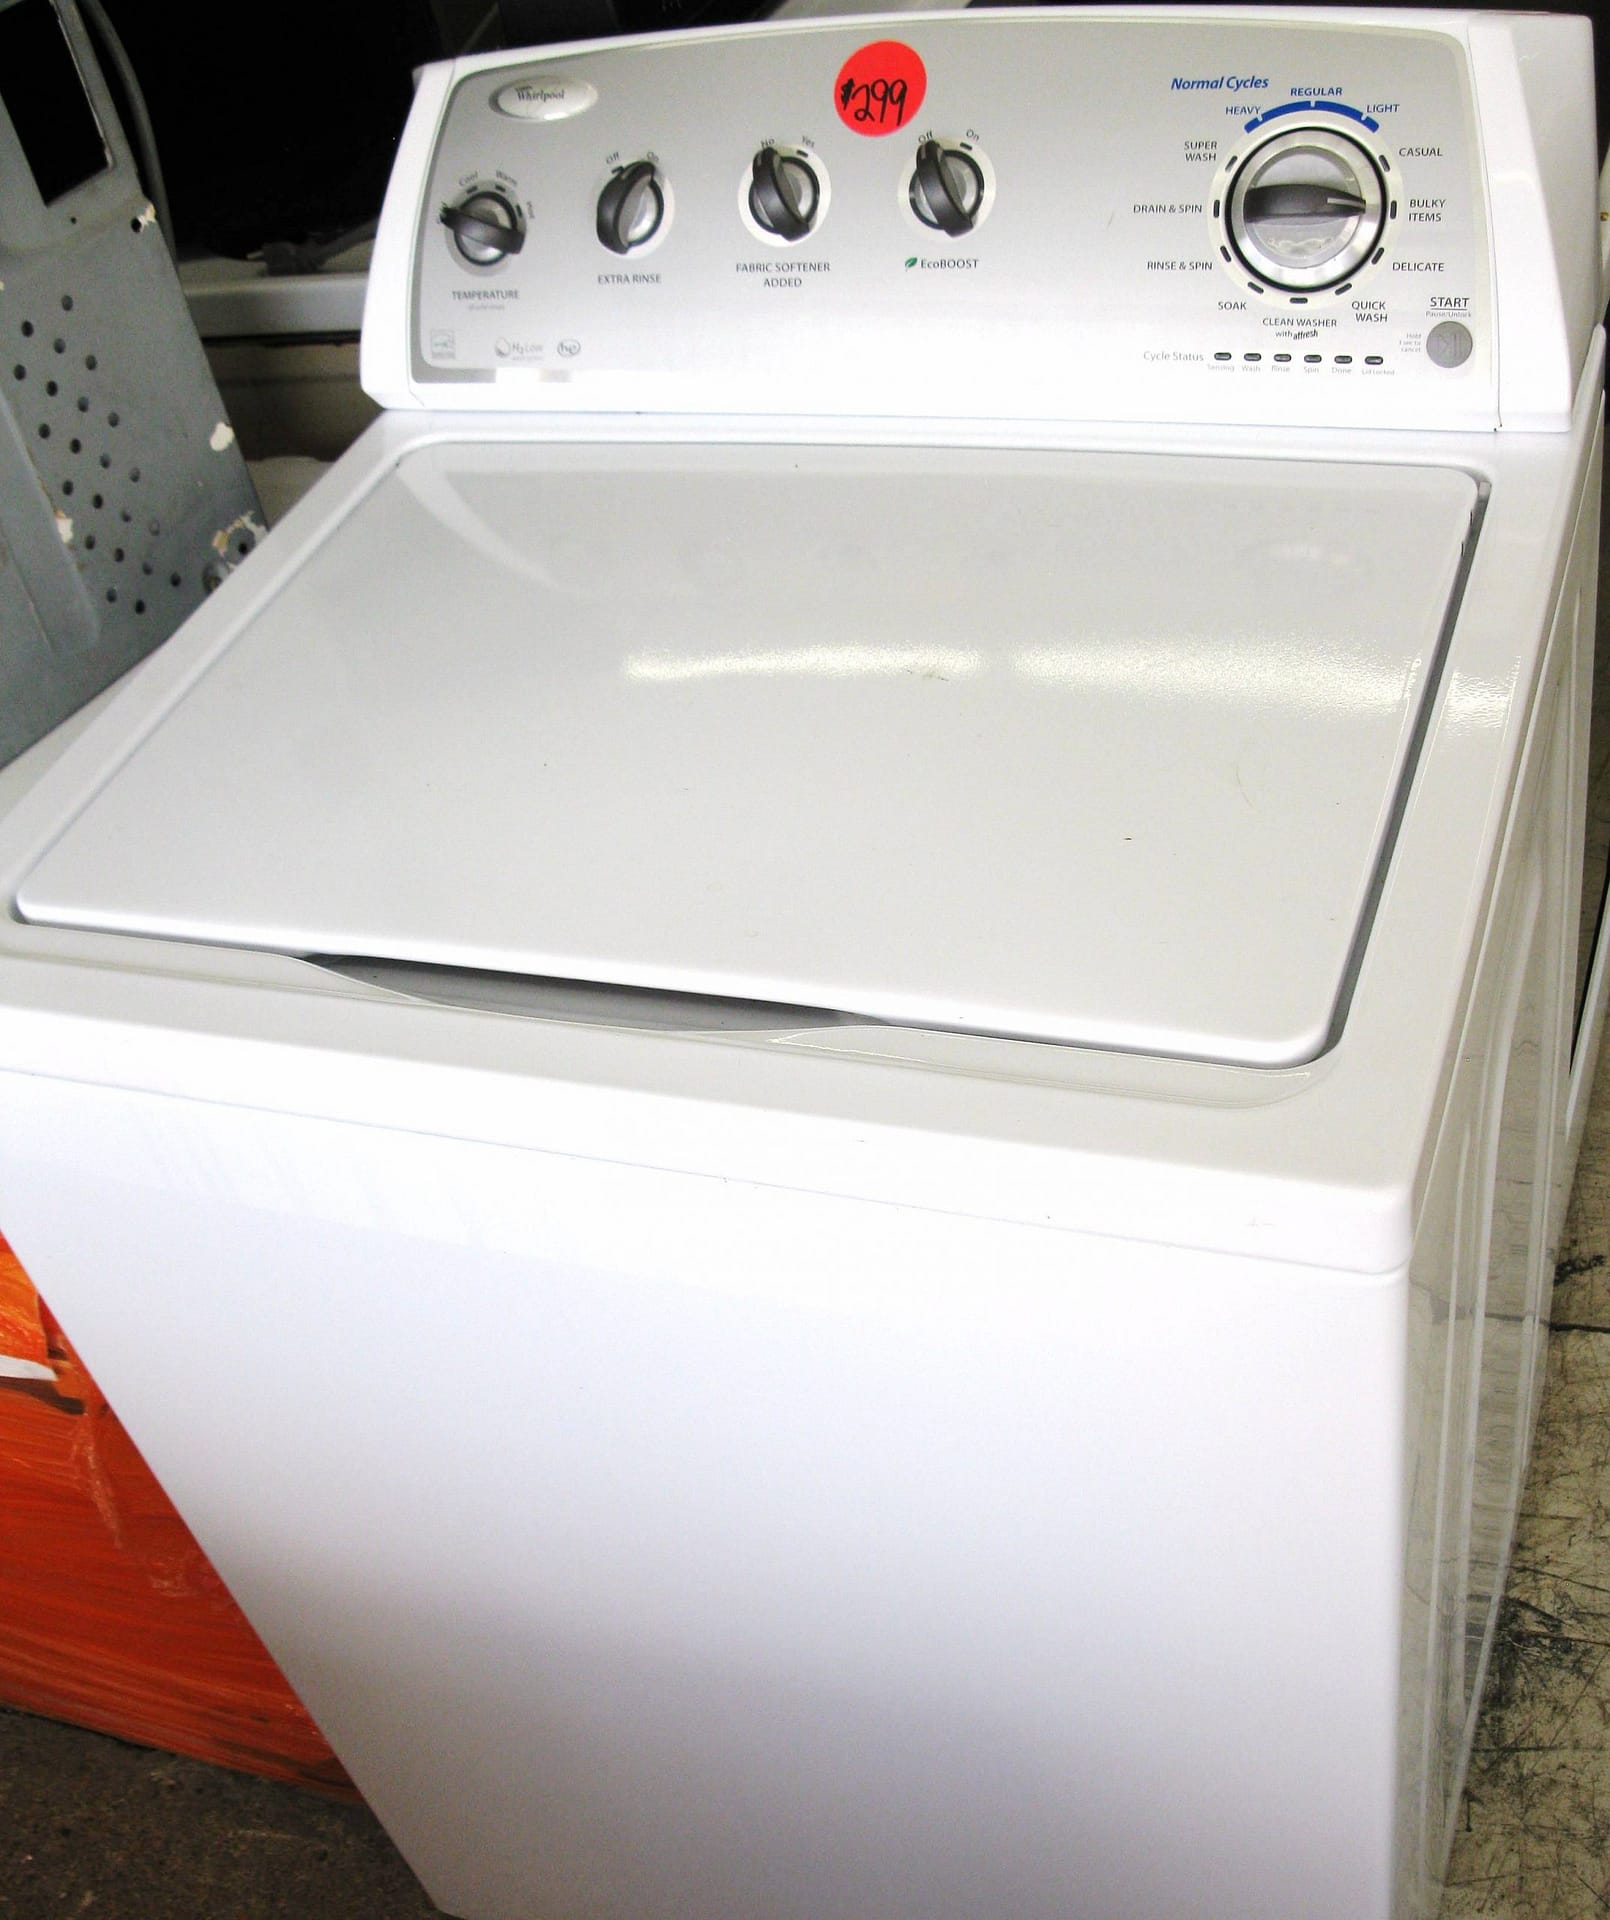 Whirlpool Washer LOC Code: Causes & 5 Ways To Fix It Now